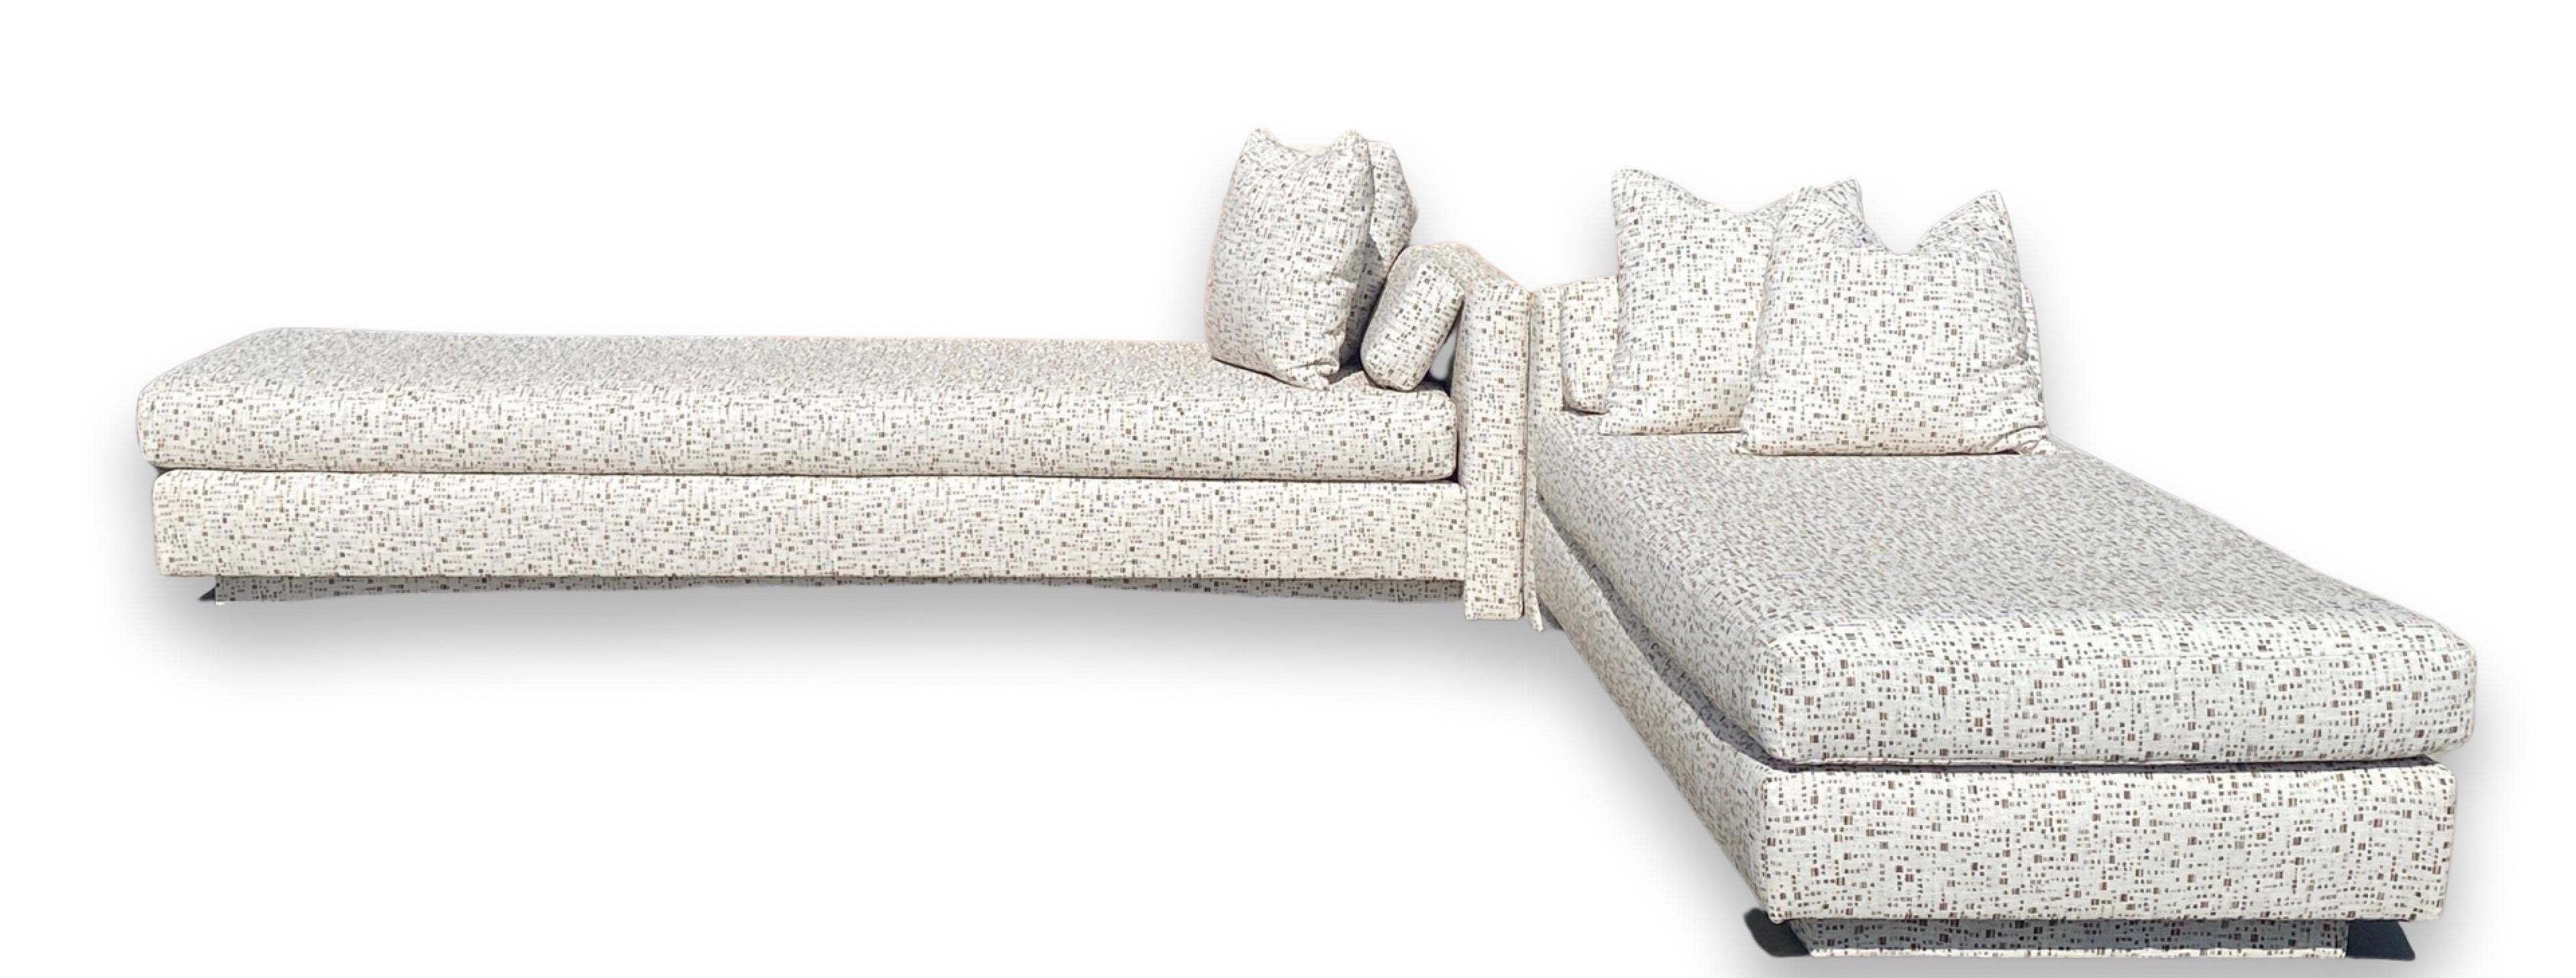 Sofa and Chaise Set in Modern Geometric Neutral Fabric in Style of Steve Chase For Sale 4